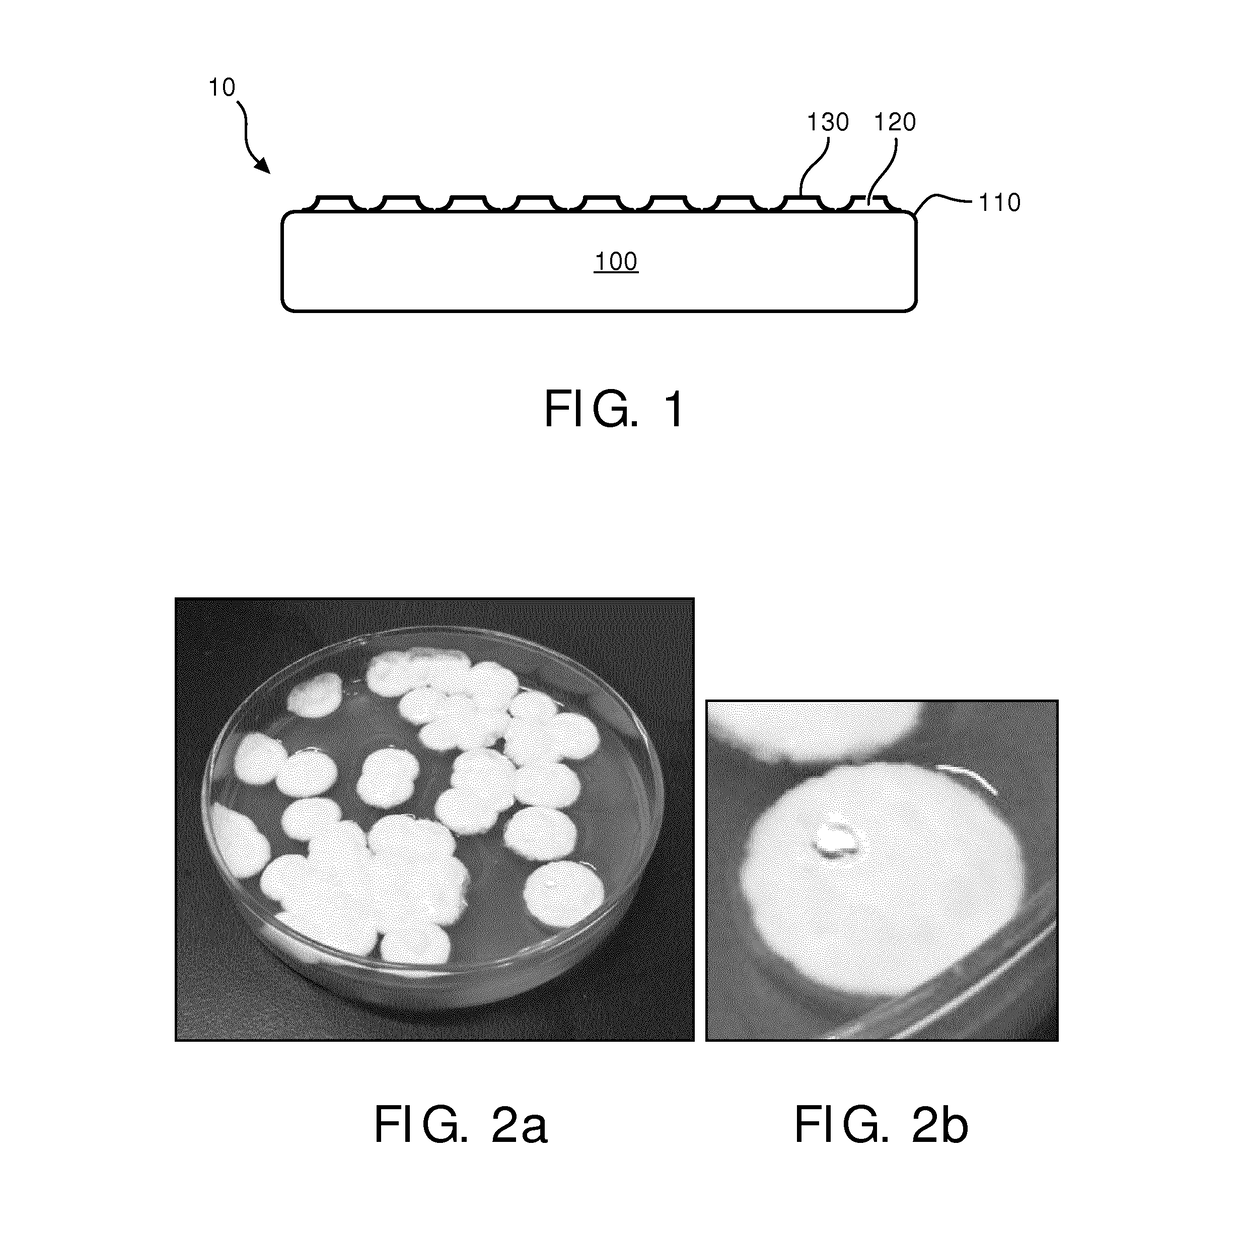 A method for treating a surface and an article comprising a layer of microbial structures